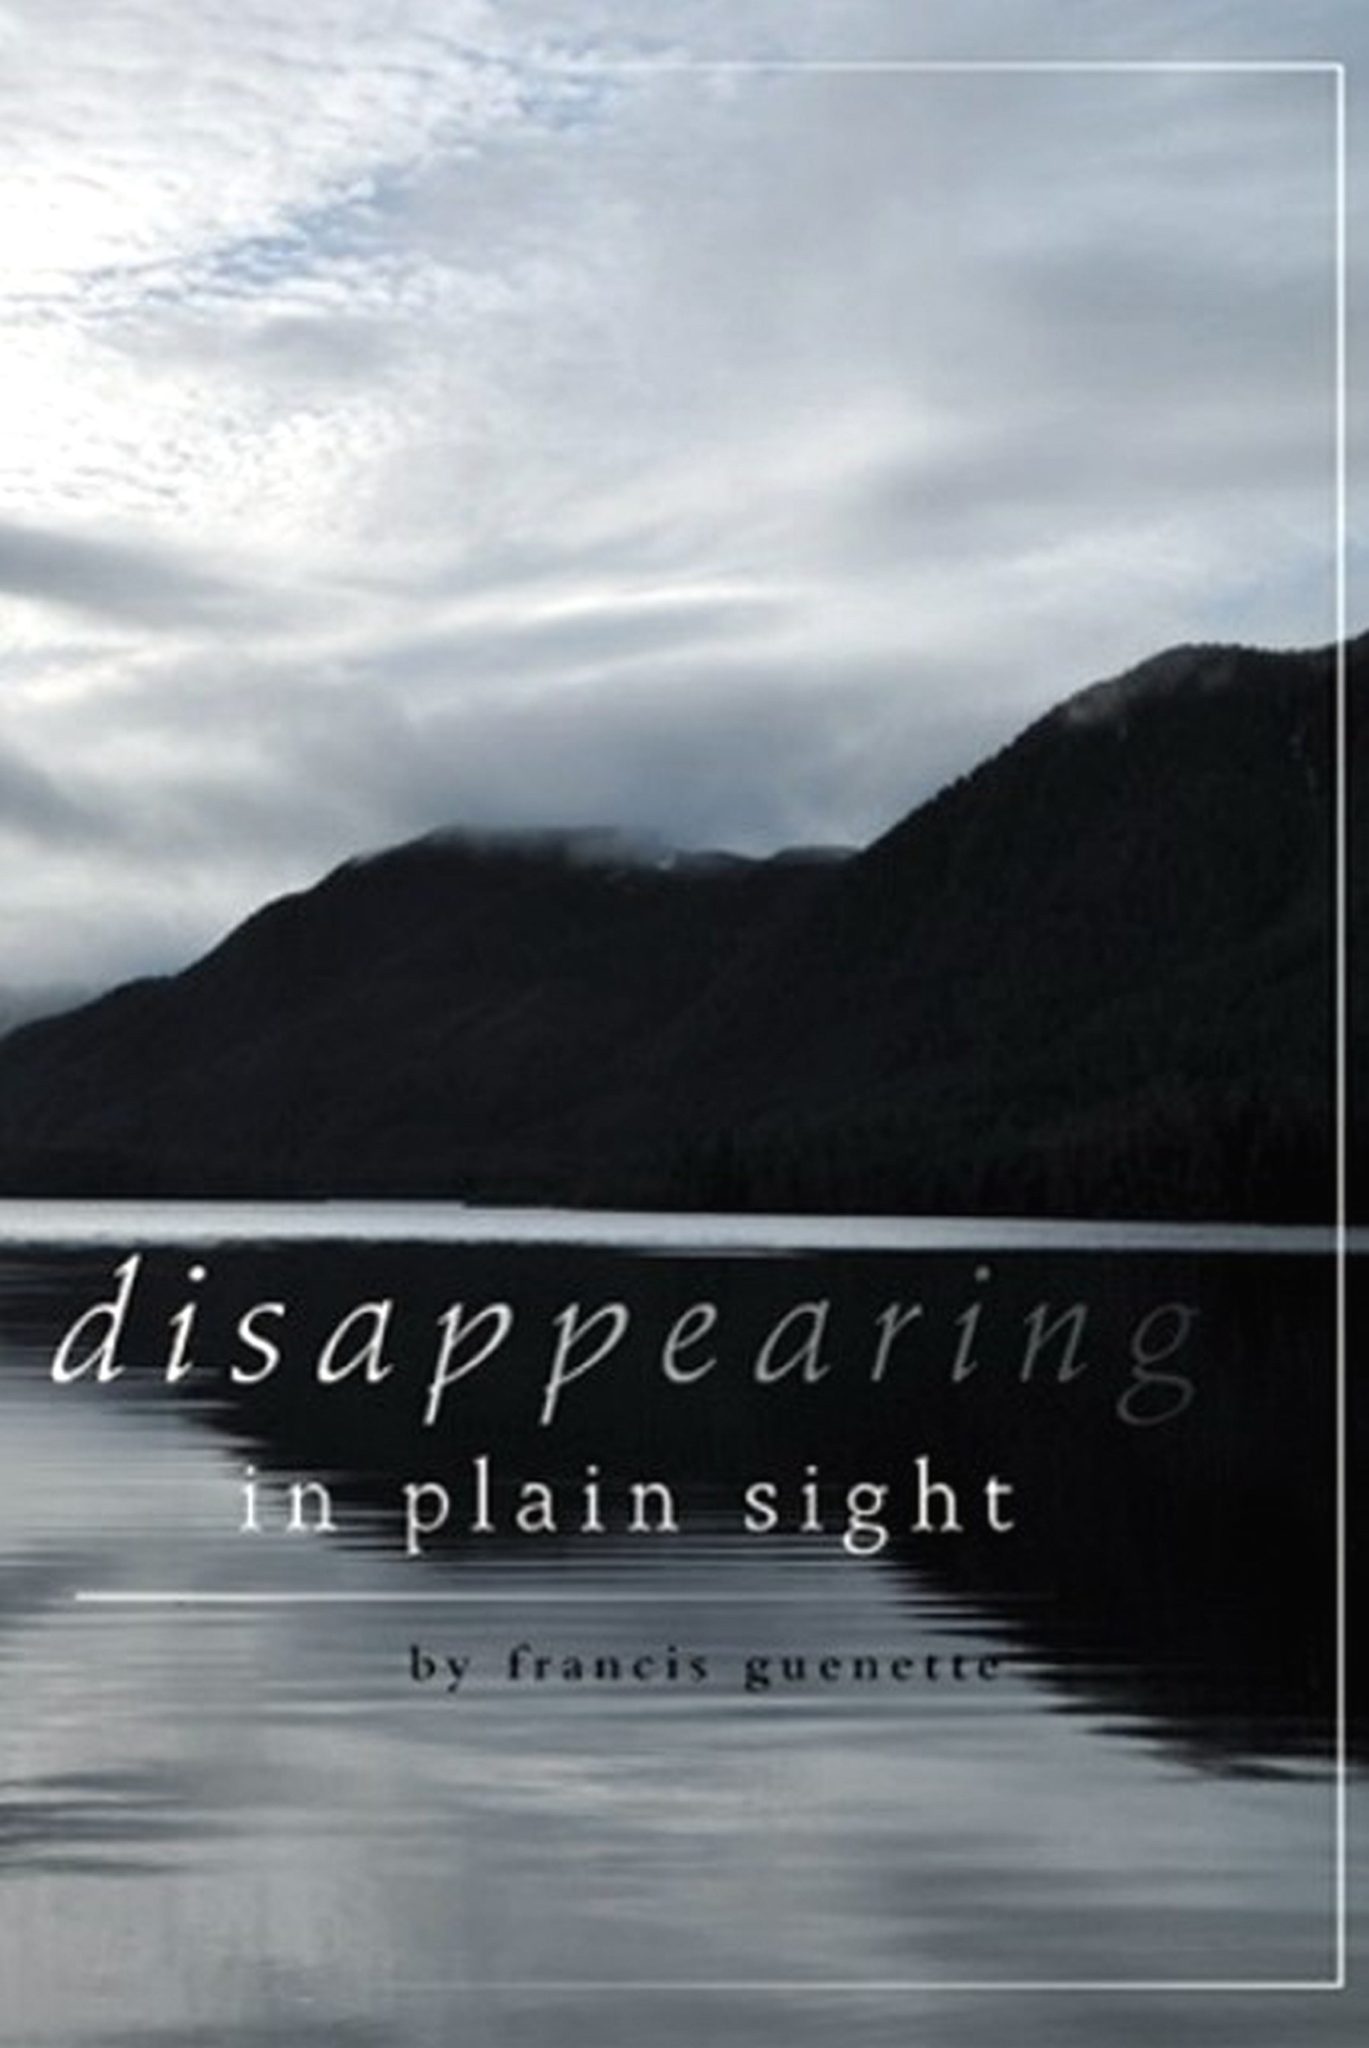 FREE: Disappearing in Plain Sight by Francis Guenette